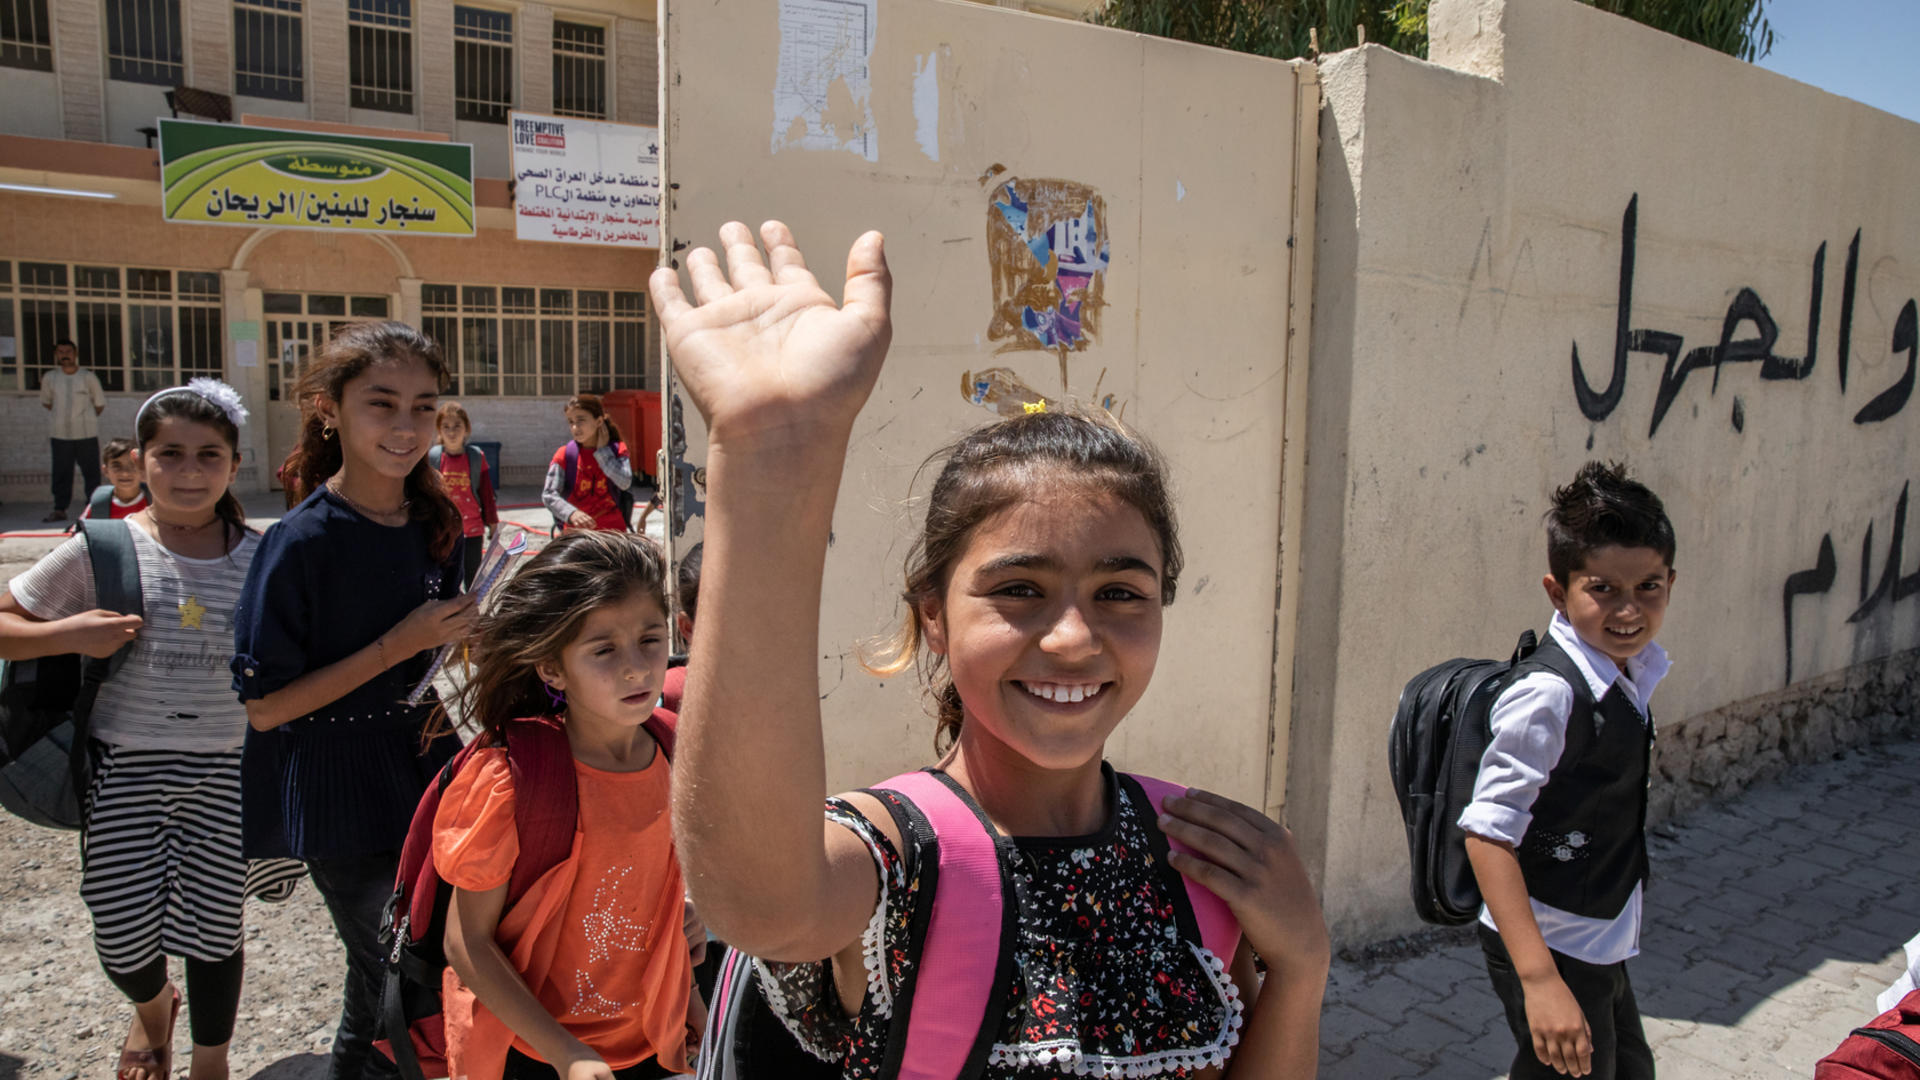 Sabah and other Iraqi children at an International Rescue Committee-supported school in Sinjar, Iraq 